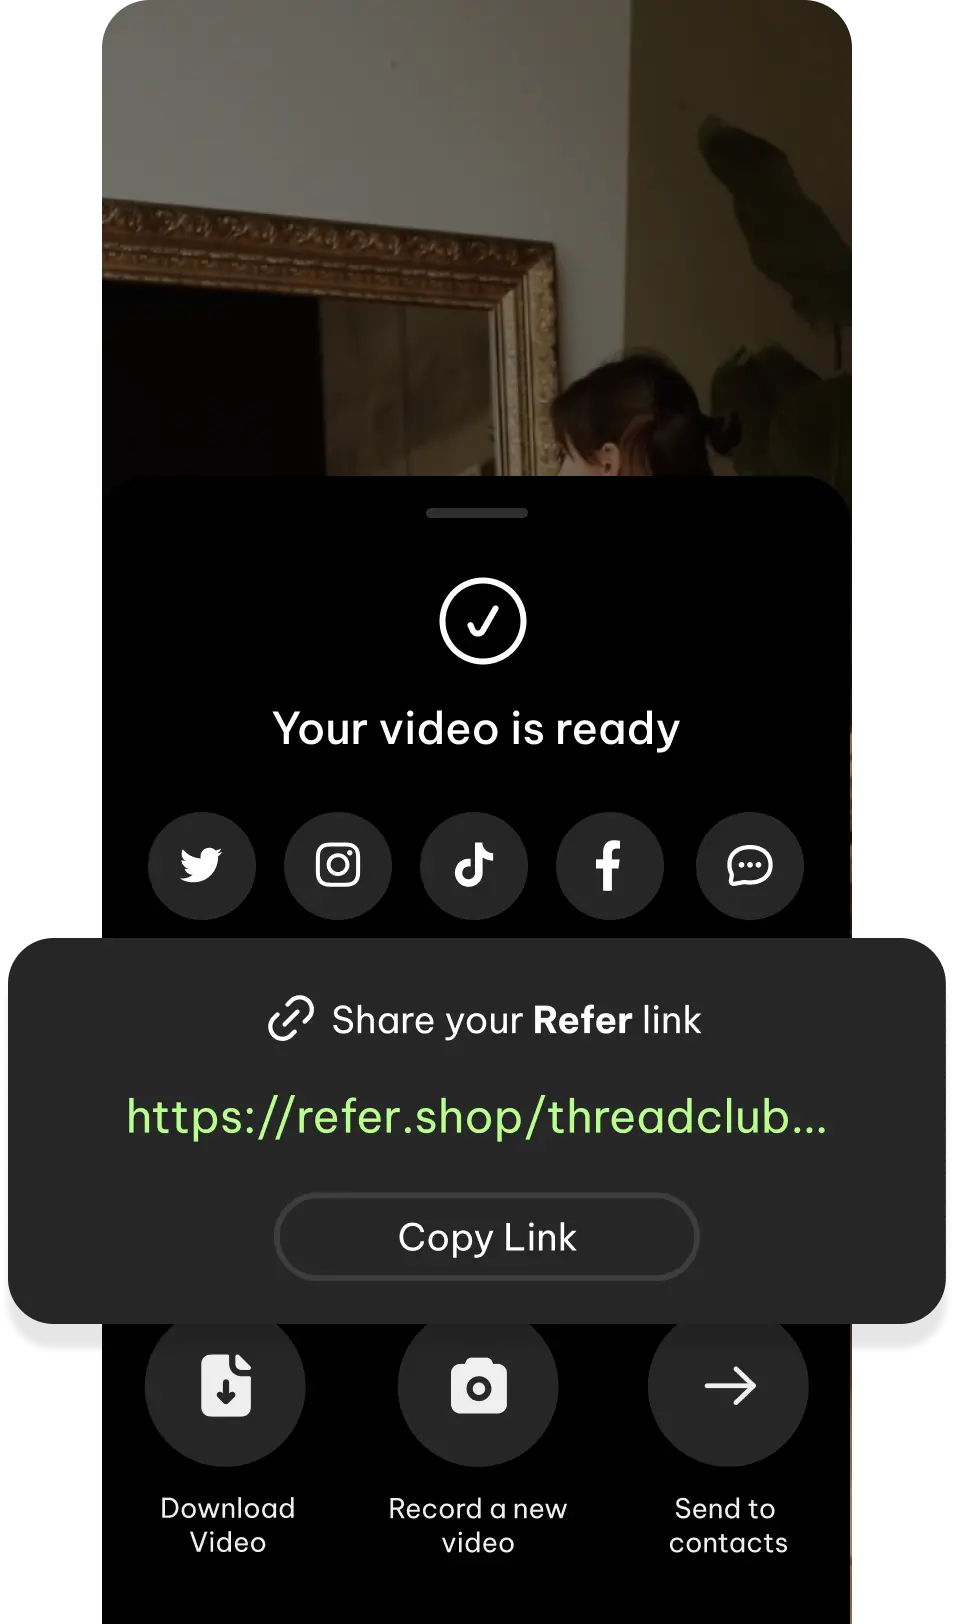 UI displaying the published video screen of the Refer iOS application allowing a user to share the link to the video